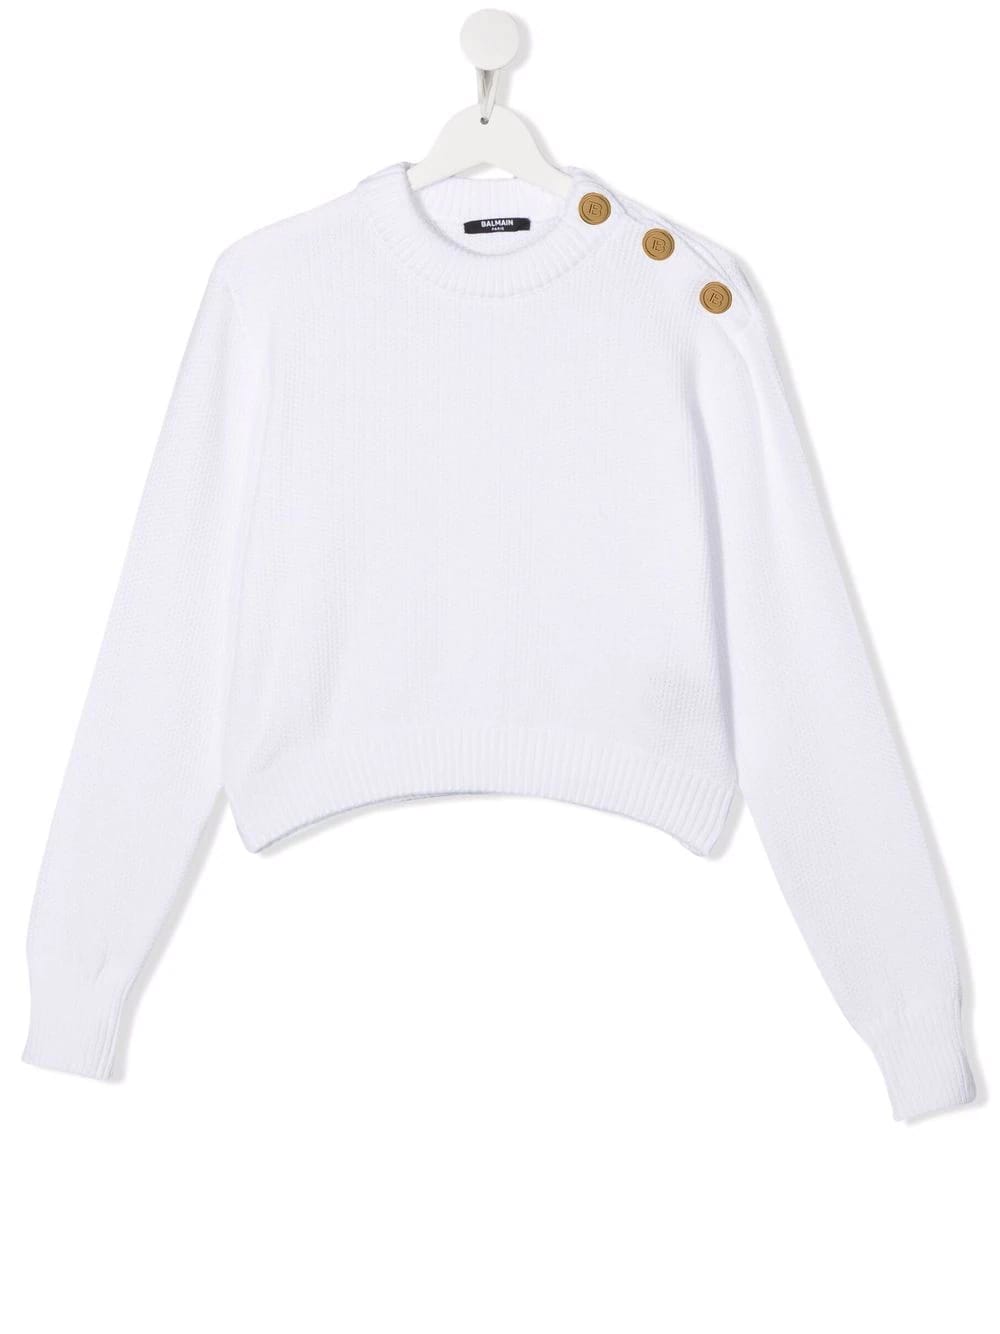 Balmain Kids White Cotton Sweater With Golden Buttons